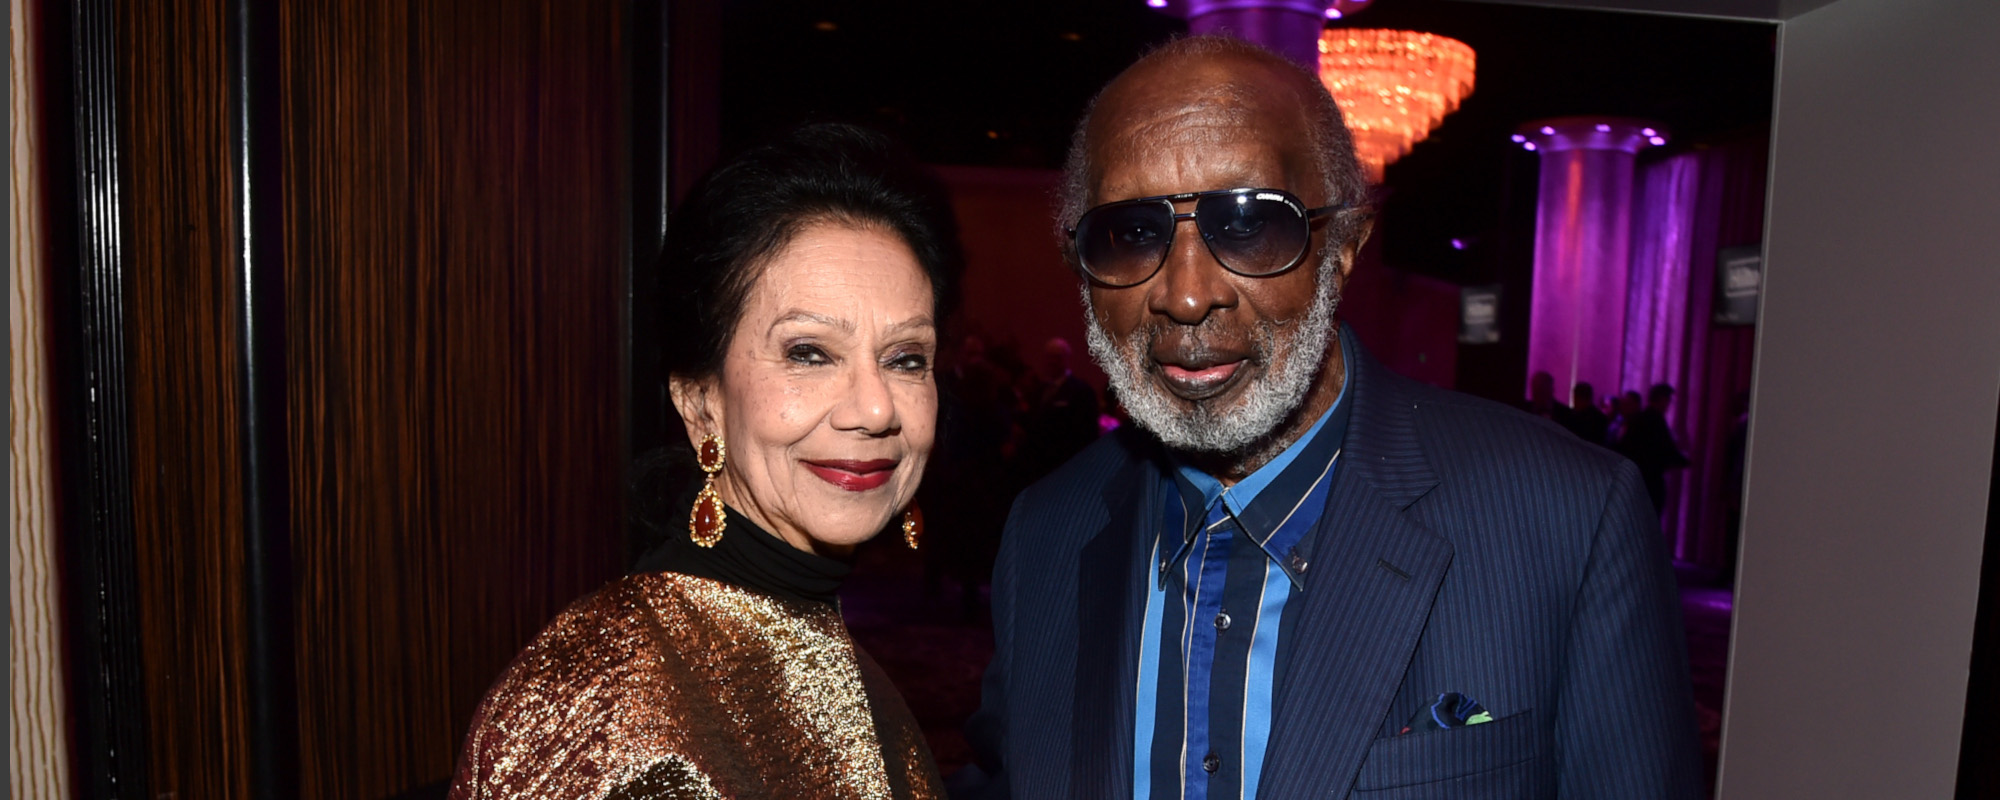 Jacqueline Avant—Wife of Music Executive Clarence Avant—Shot and Killed in Home Invasion